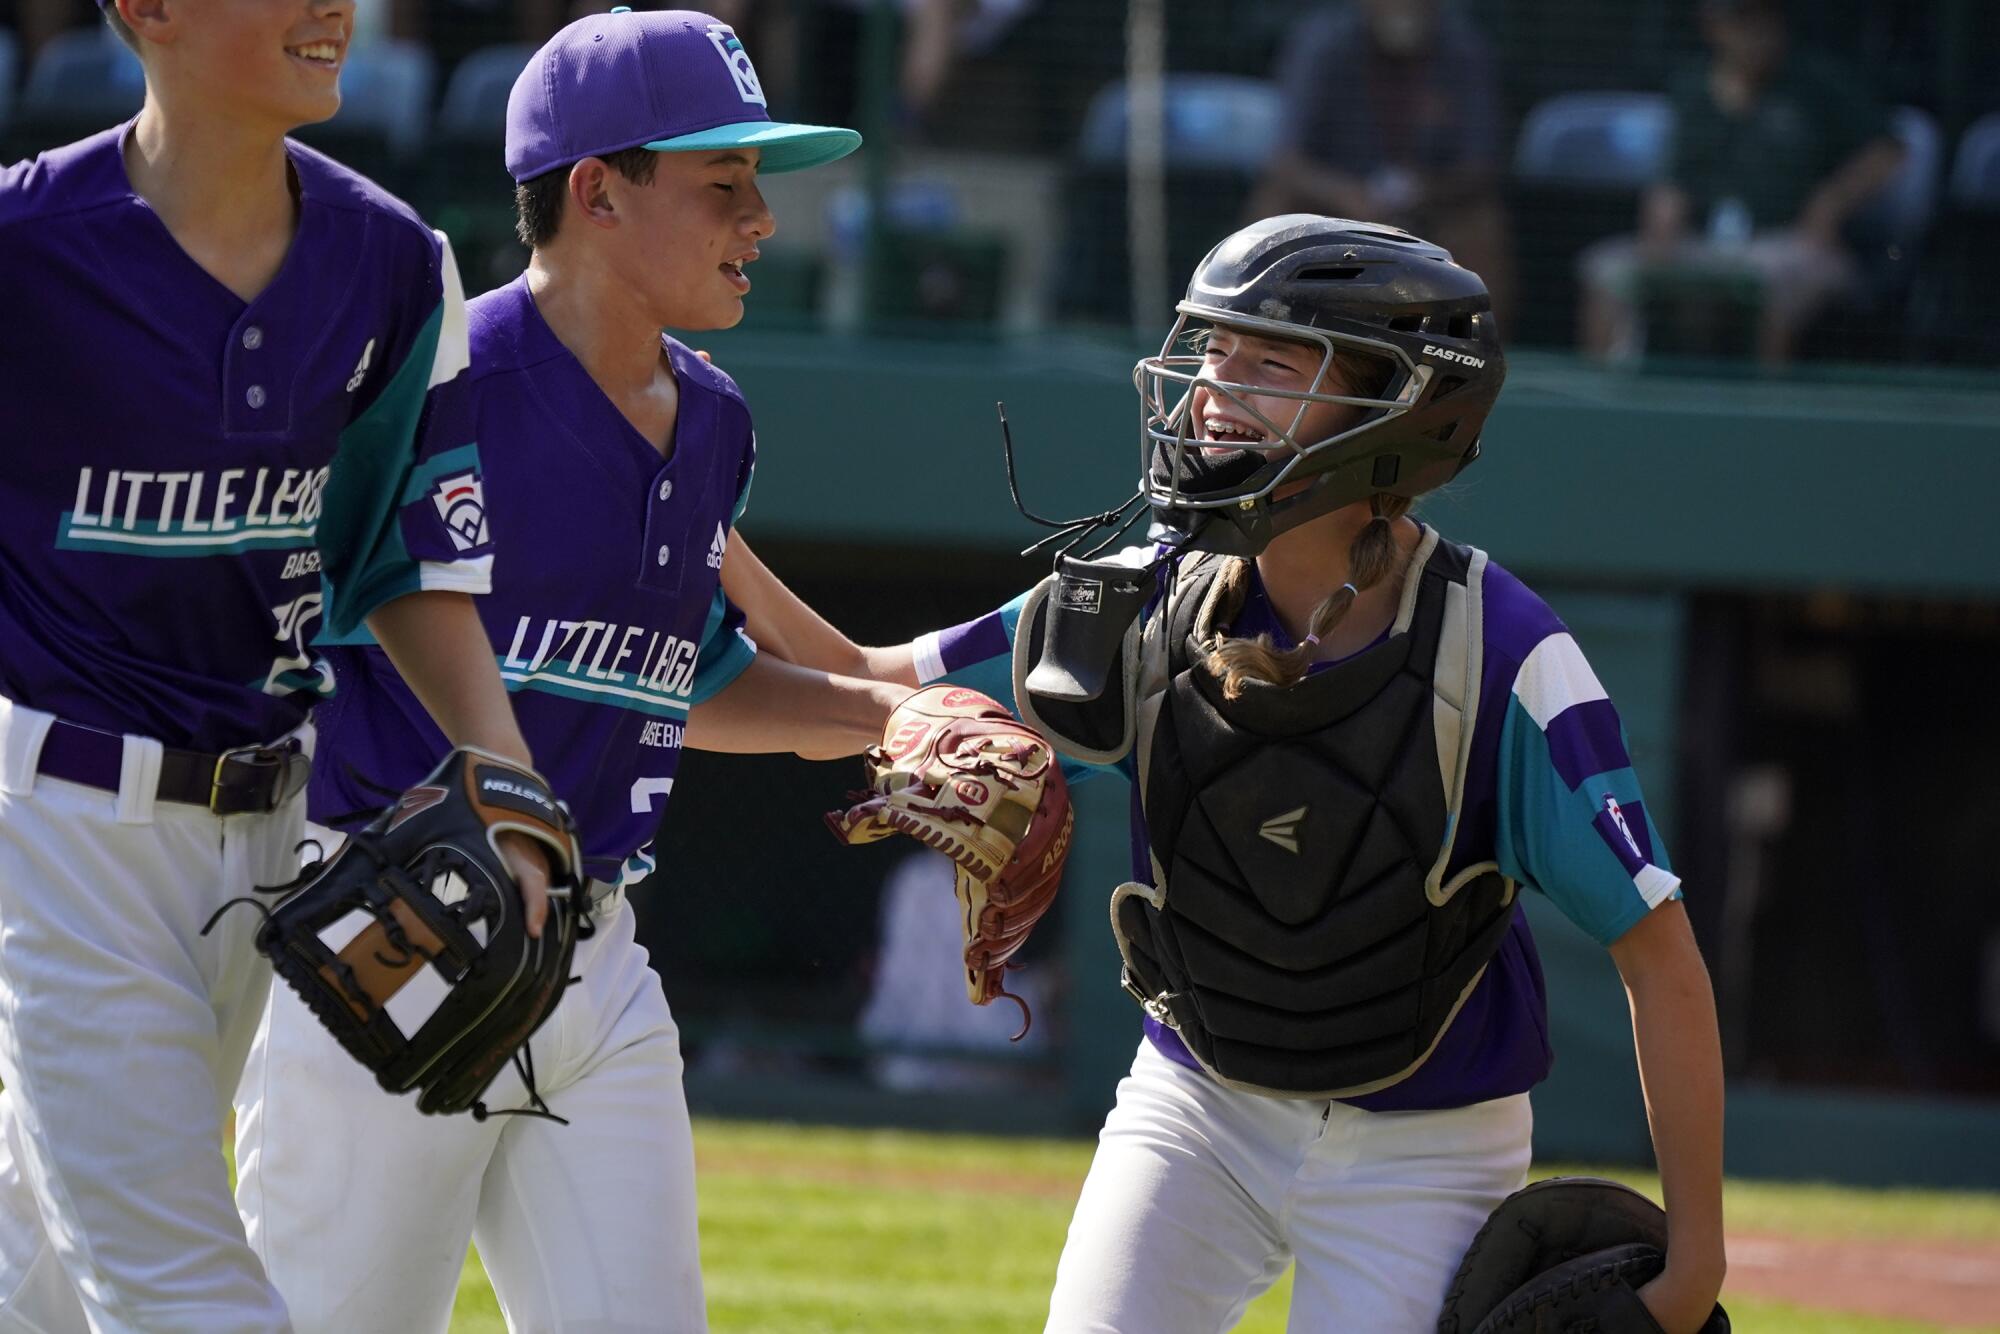 Abilene, Texas catcher Ella Bruning, right, celebrates with pitcher Dylan Regata, center, after the side is retired.